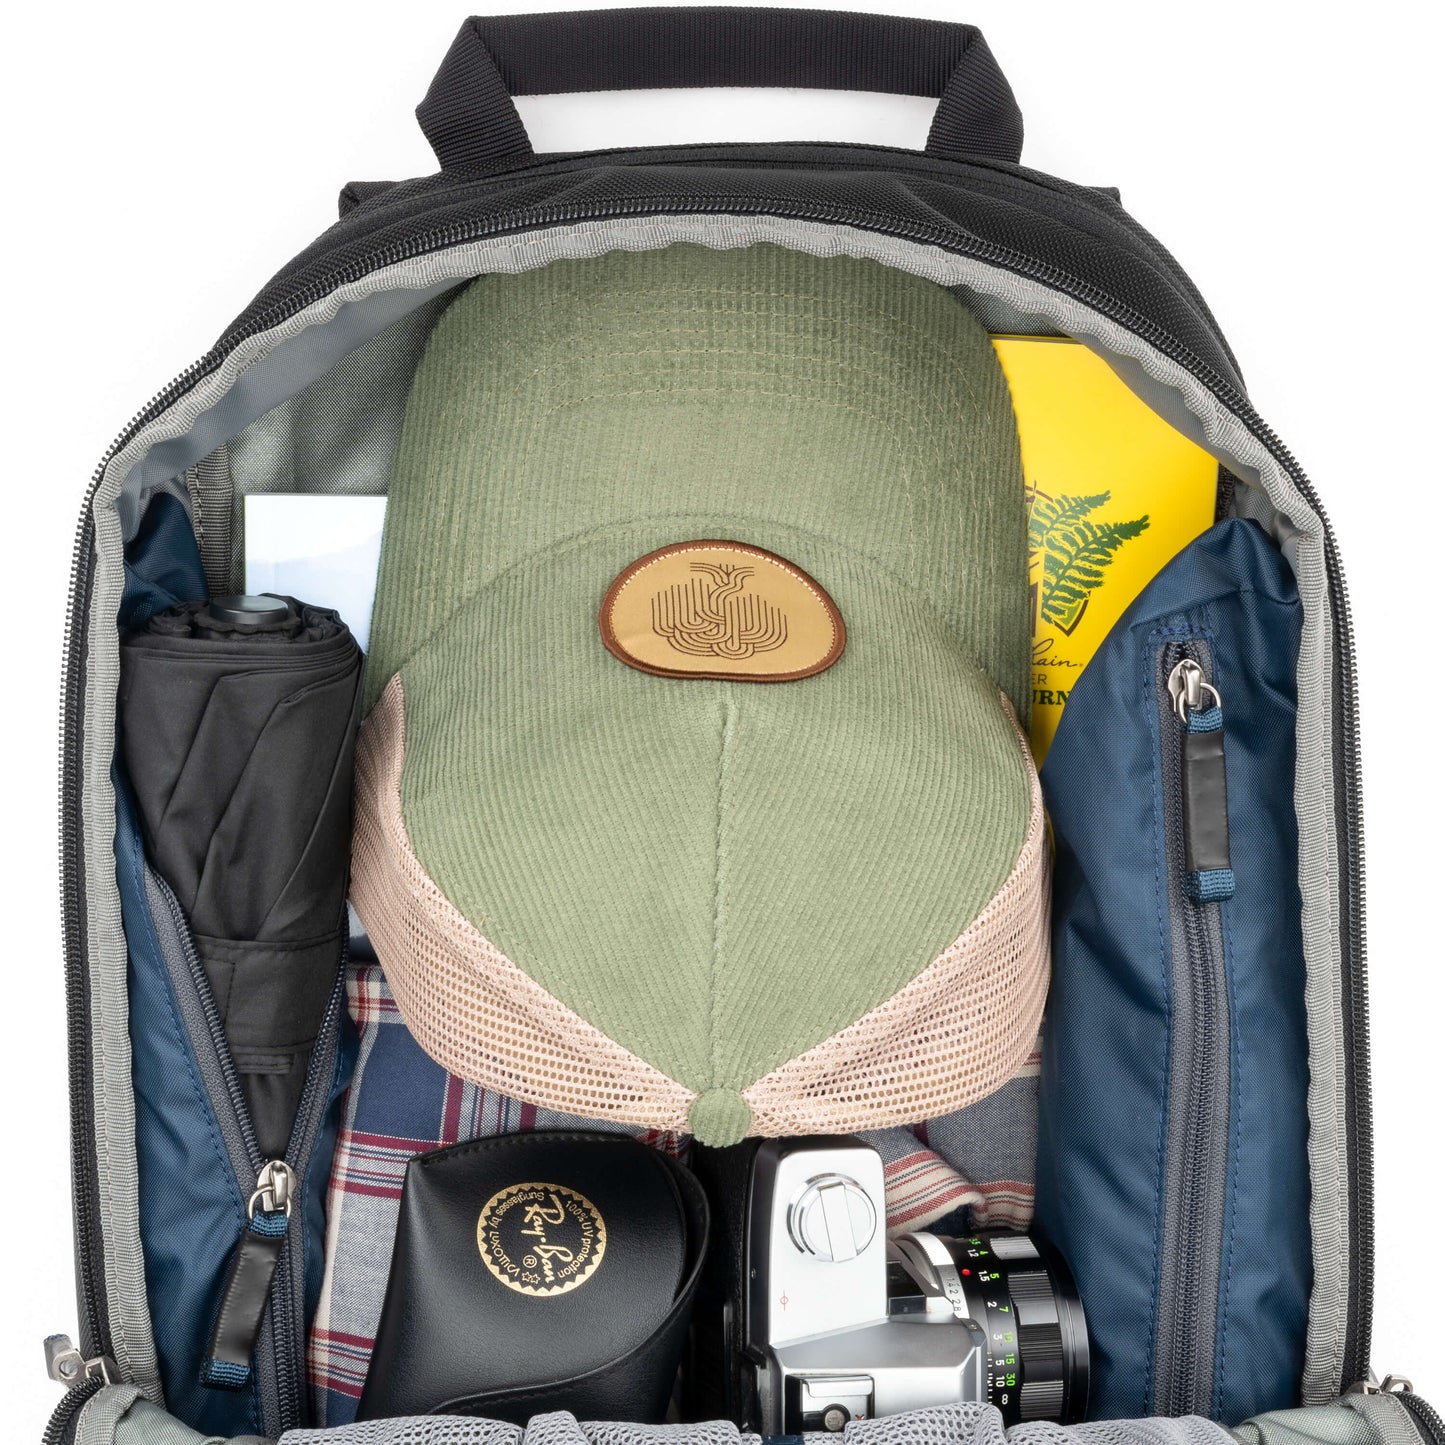 
                  
                    Exterior side pockets are also accessible from the interior of the pack with vertical zippers for convenience
                  
                